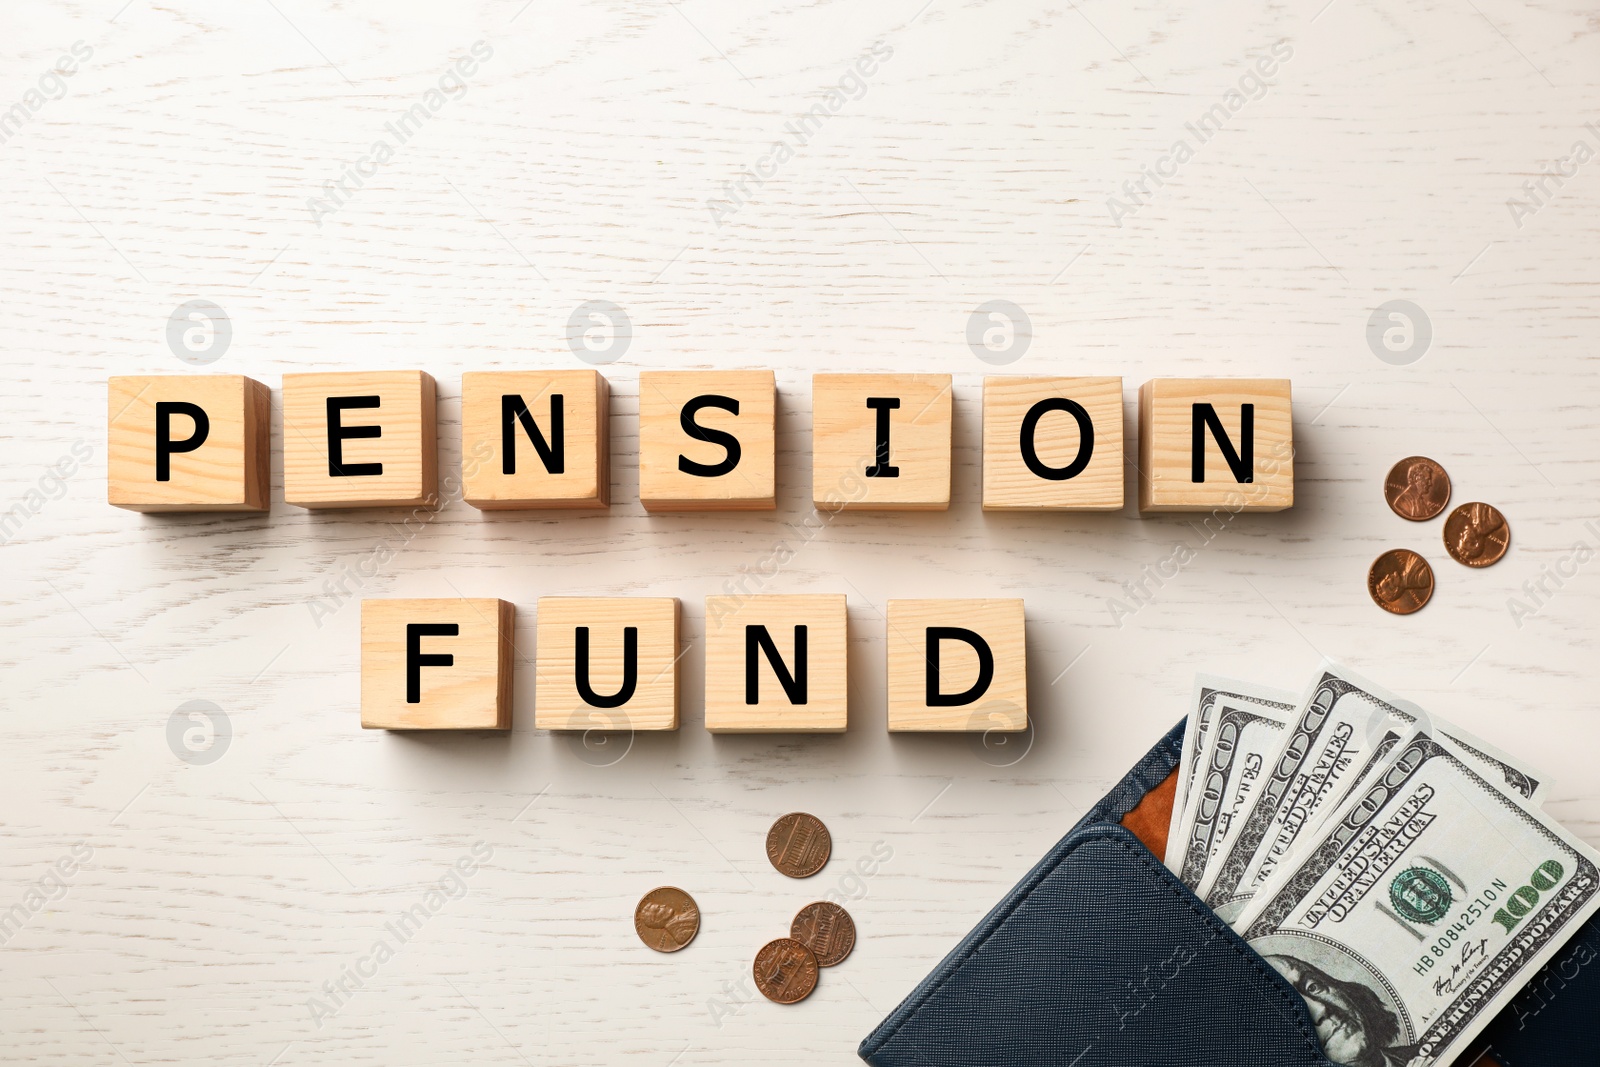 Photo of Cubes with words "PENSION FUND" and money on wooden background, flat lay